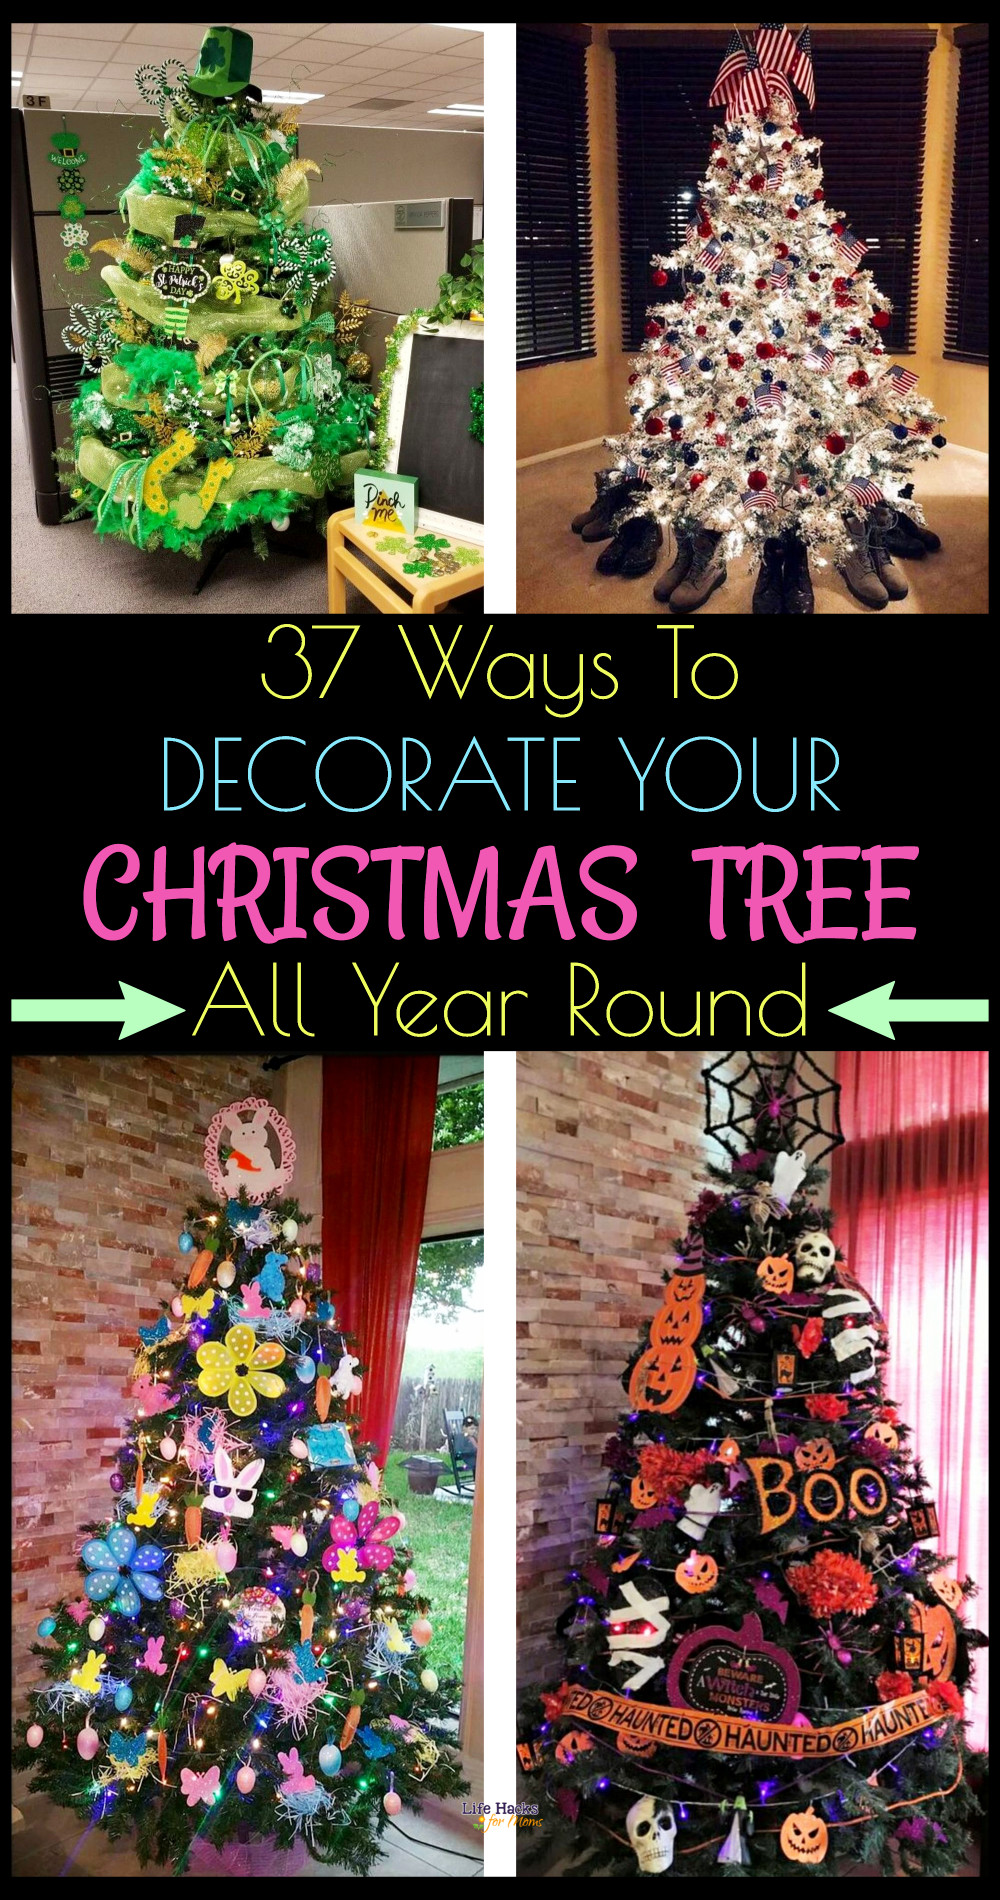 Monthly Christmas Tree Ideas To enjoy your Christmas tree all year round - Unique Seasonal Year Round Christmas Tree Ideas - Unique ways to decorate your fake artificial Christmas tree all year long - Halloween trees, Fall & Thanksgiving Christmas trees, Easter trees, birthday trees, mothers day trees, New Years Christmas tree ideas and more ways to display and decorate for all holidays, celebration party themes and special occasions